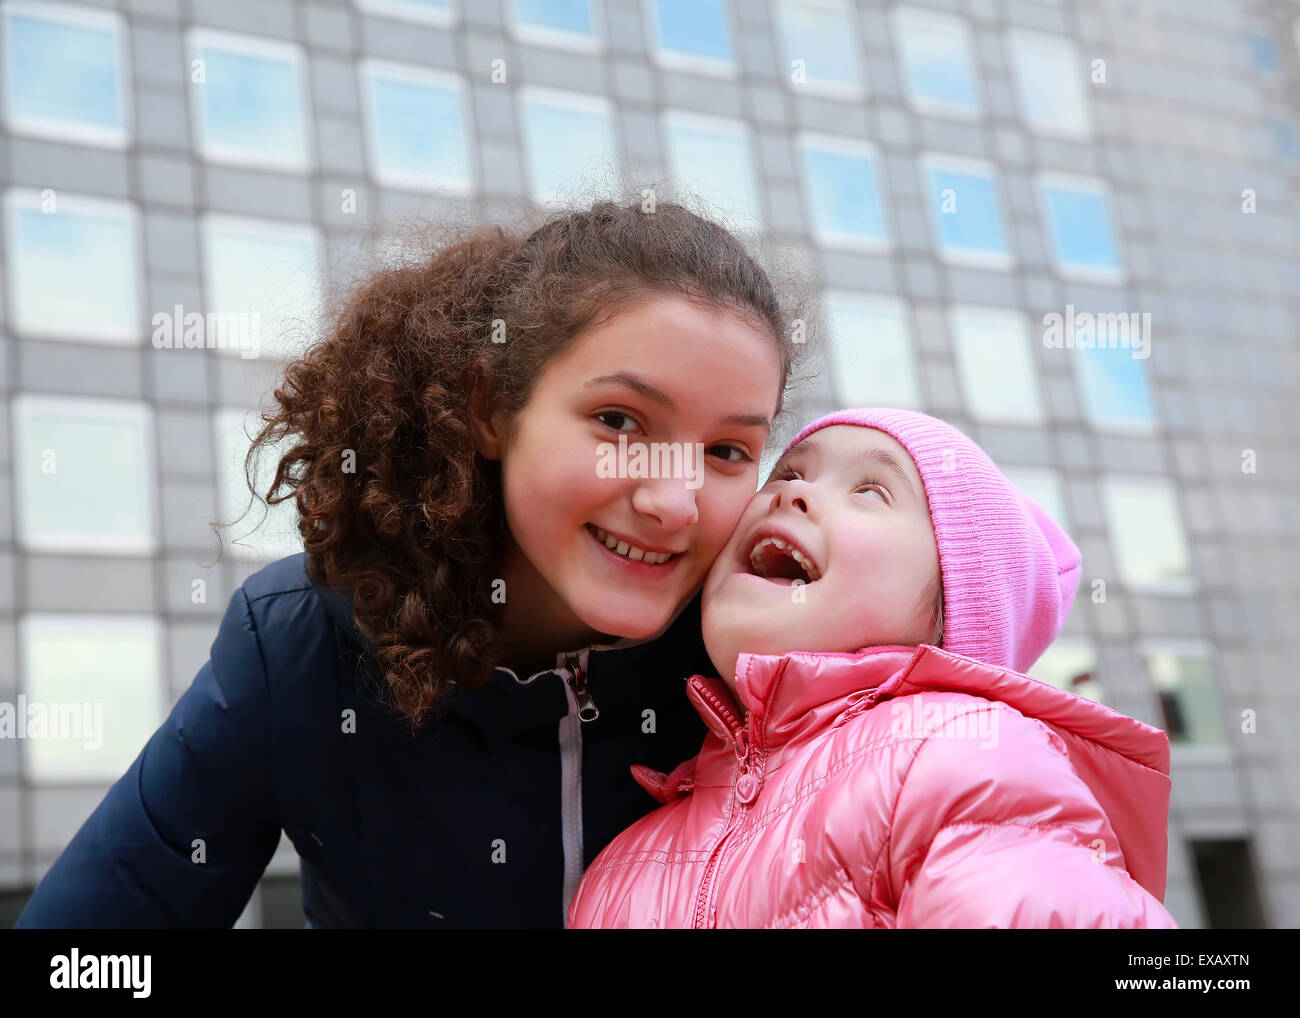 Happy family moments - Young girls having fun Stock Photo